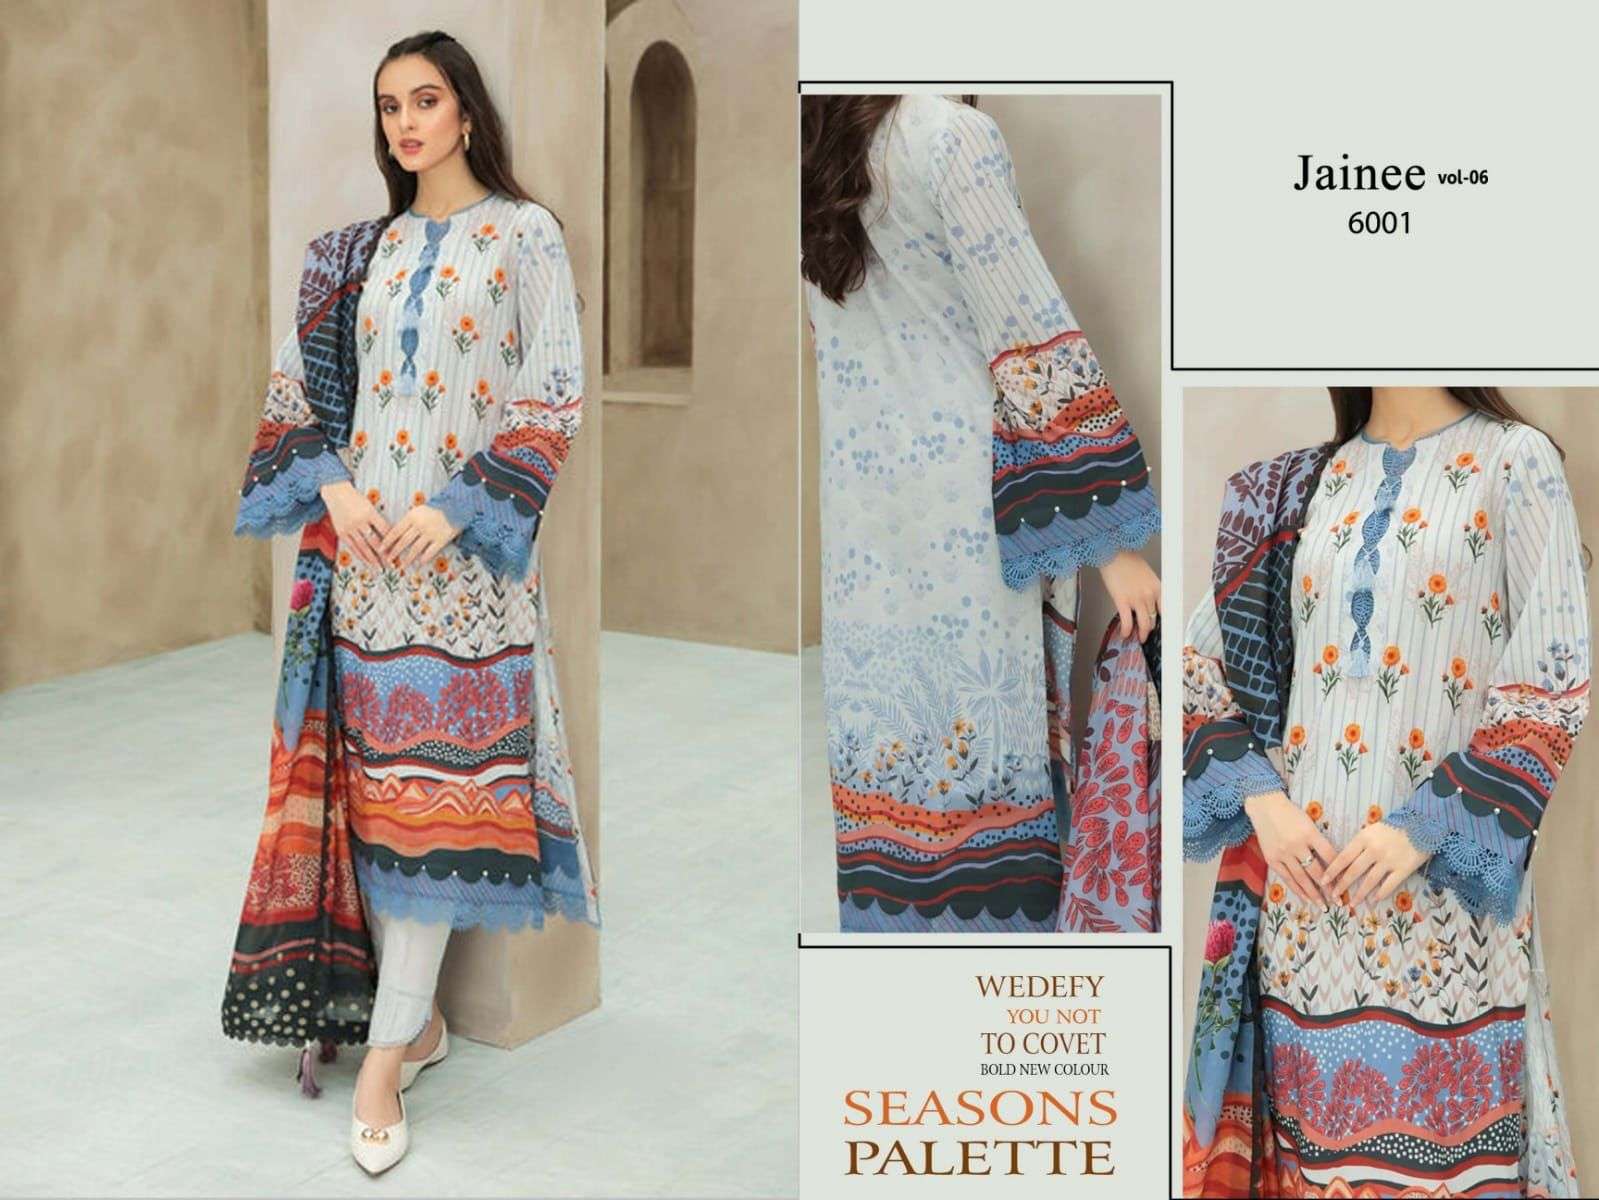 Jainee Vol-6 By Agha Noor 6001 To 6006 Series Beautiful Suits Colorful Stylish Fancy Casual Wear & Ethnic Wear Lawn Cotton Print Dresses At Wholesale Price